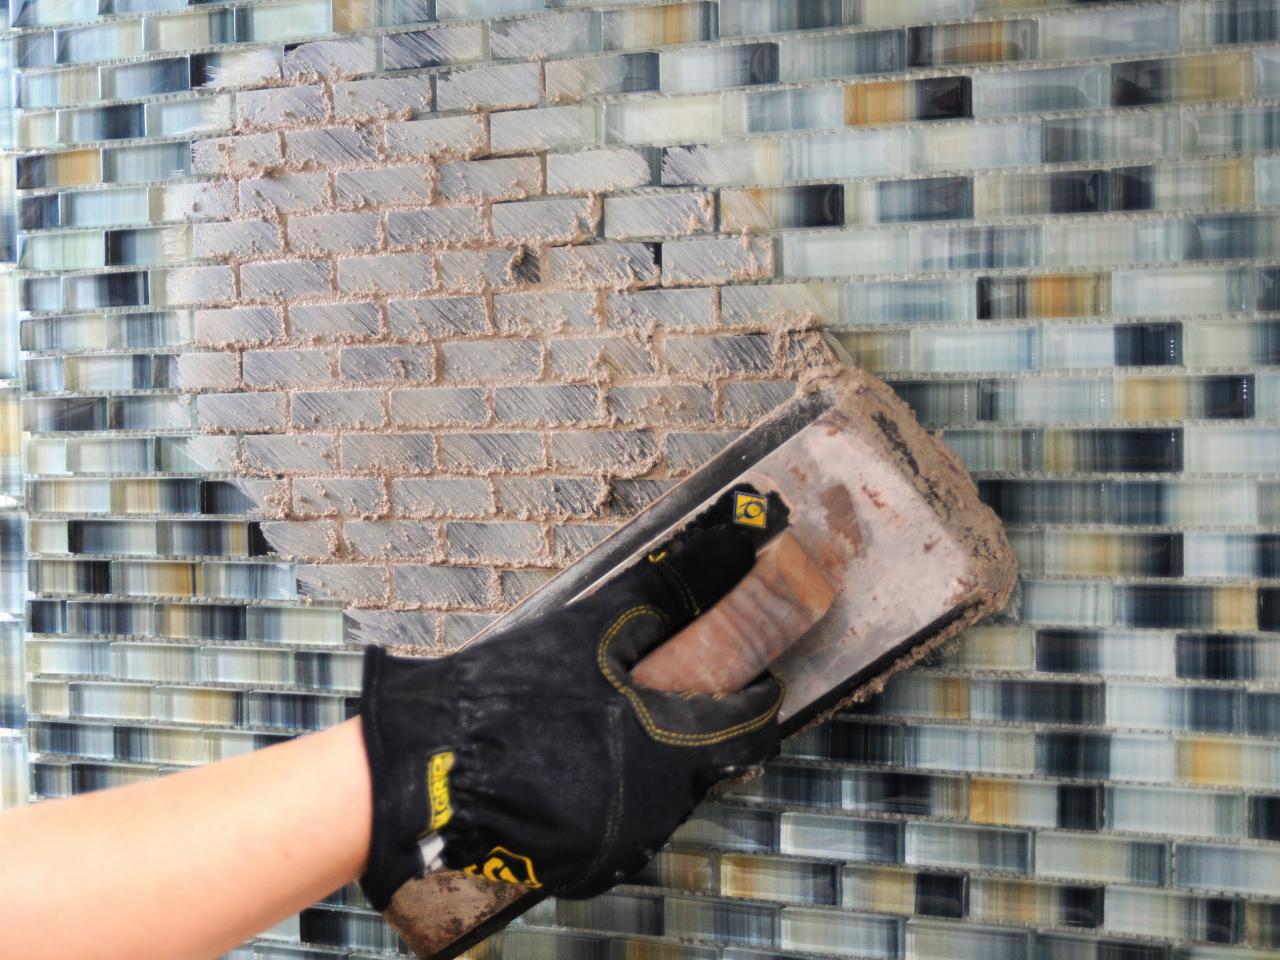 How To Install A Tile Backsplash, How Far Should Subway Tile Be Spaced